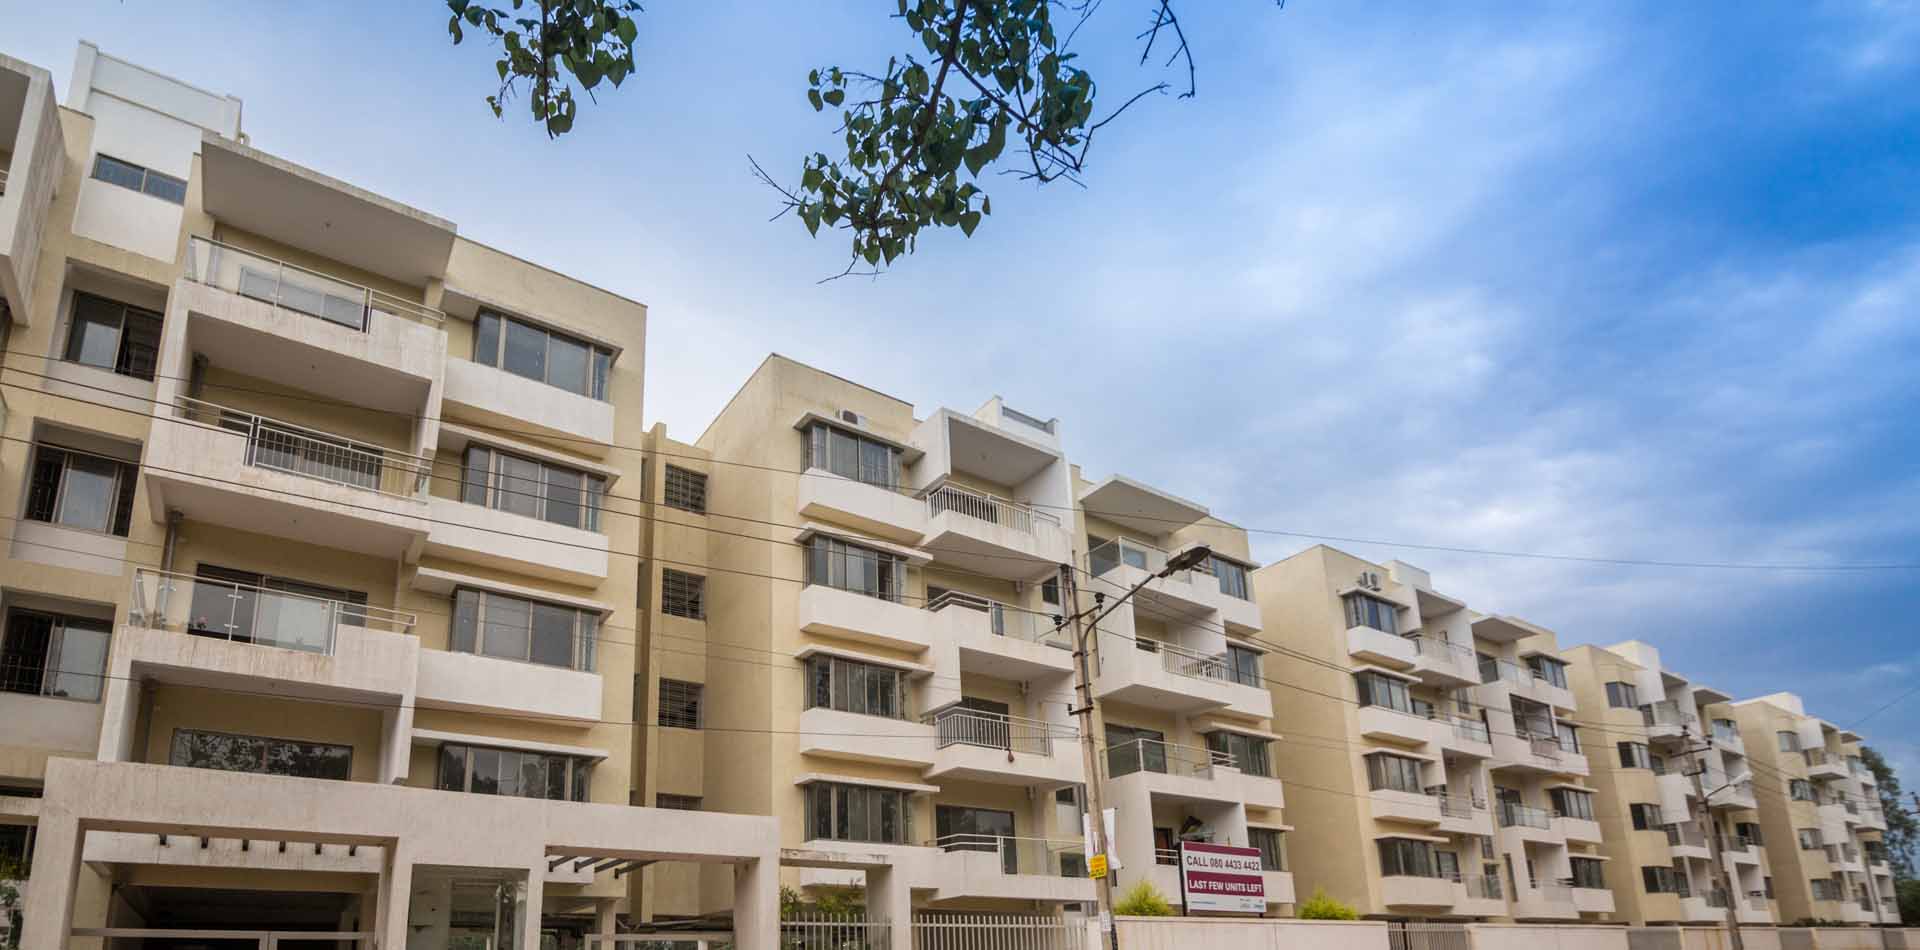 Century Linea luxury apartments in Amrutahalli have homes with two sides open spaces Update